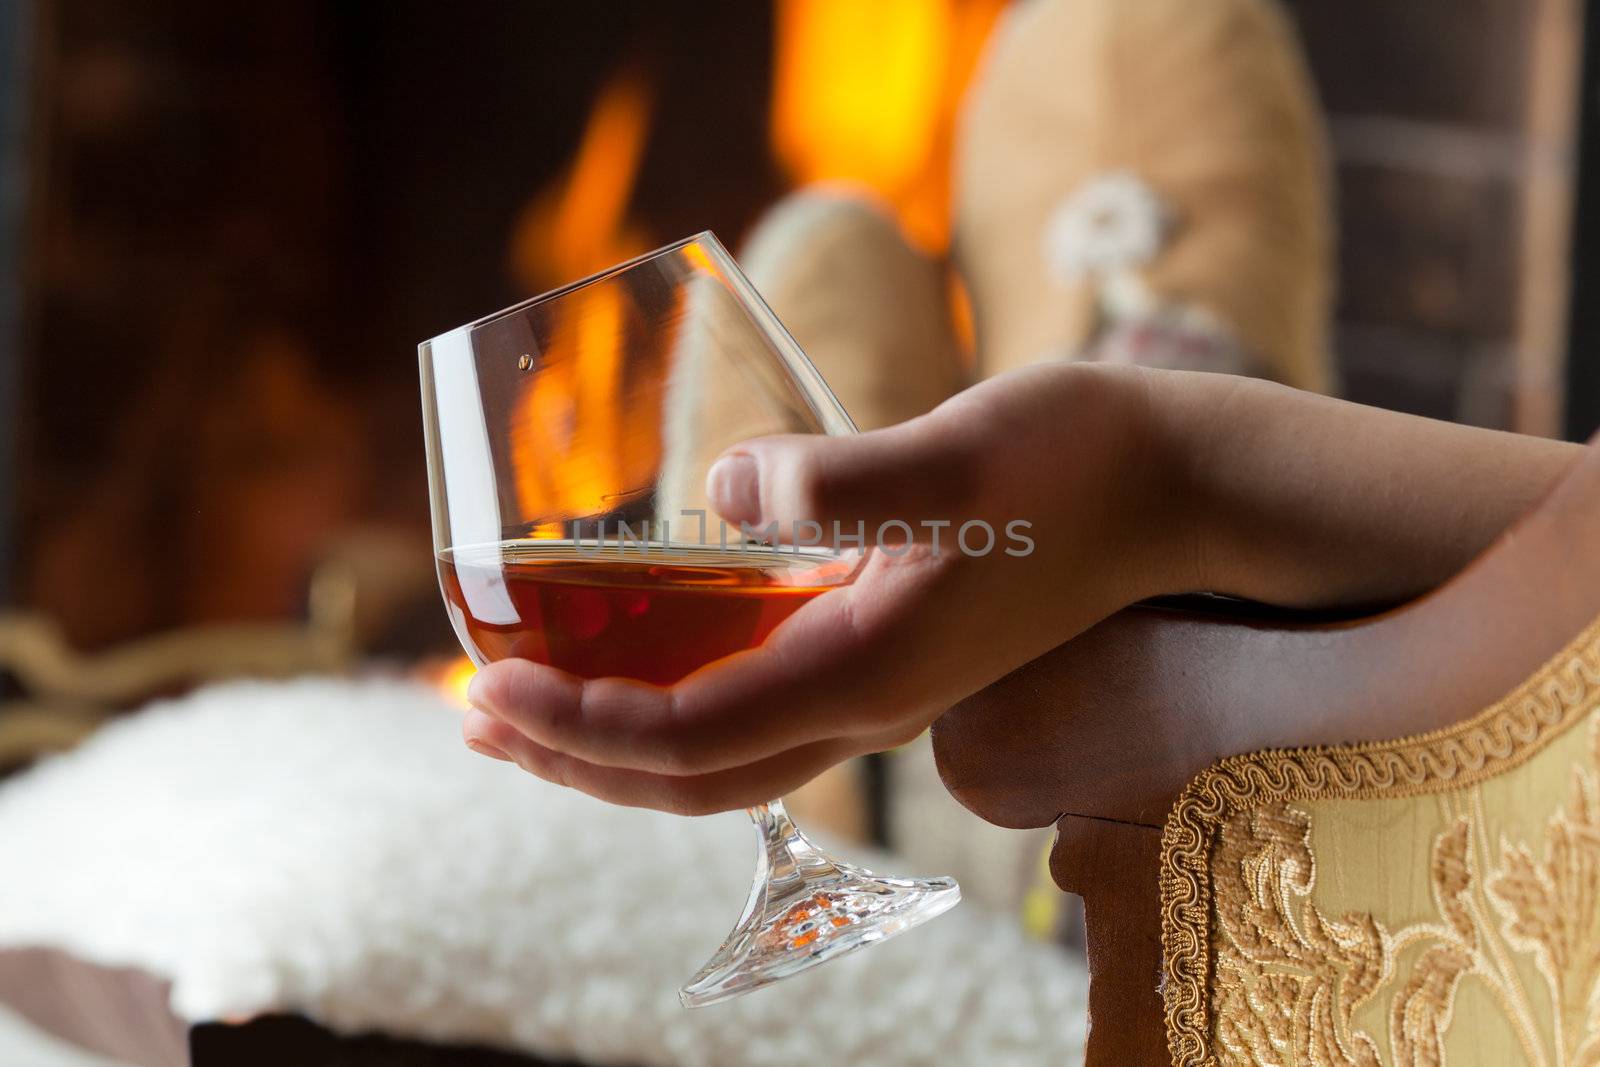 Resting at the burning fireplace fire with a glass of cognac by Antartis